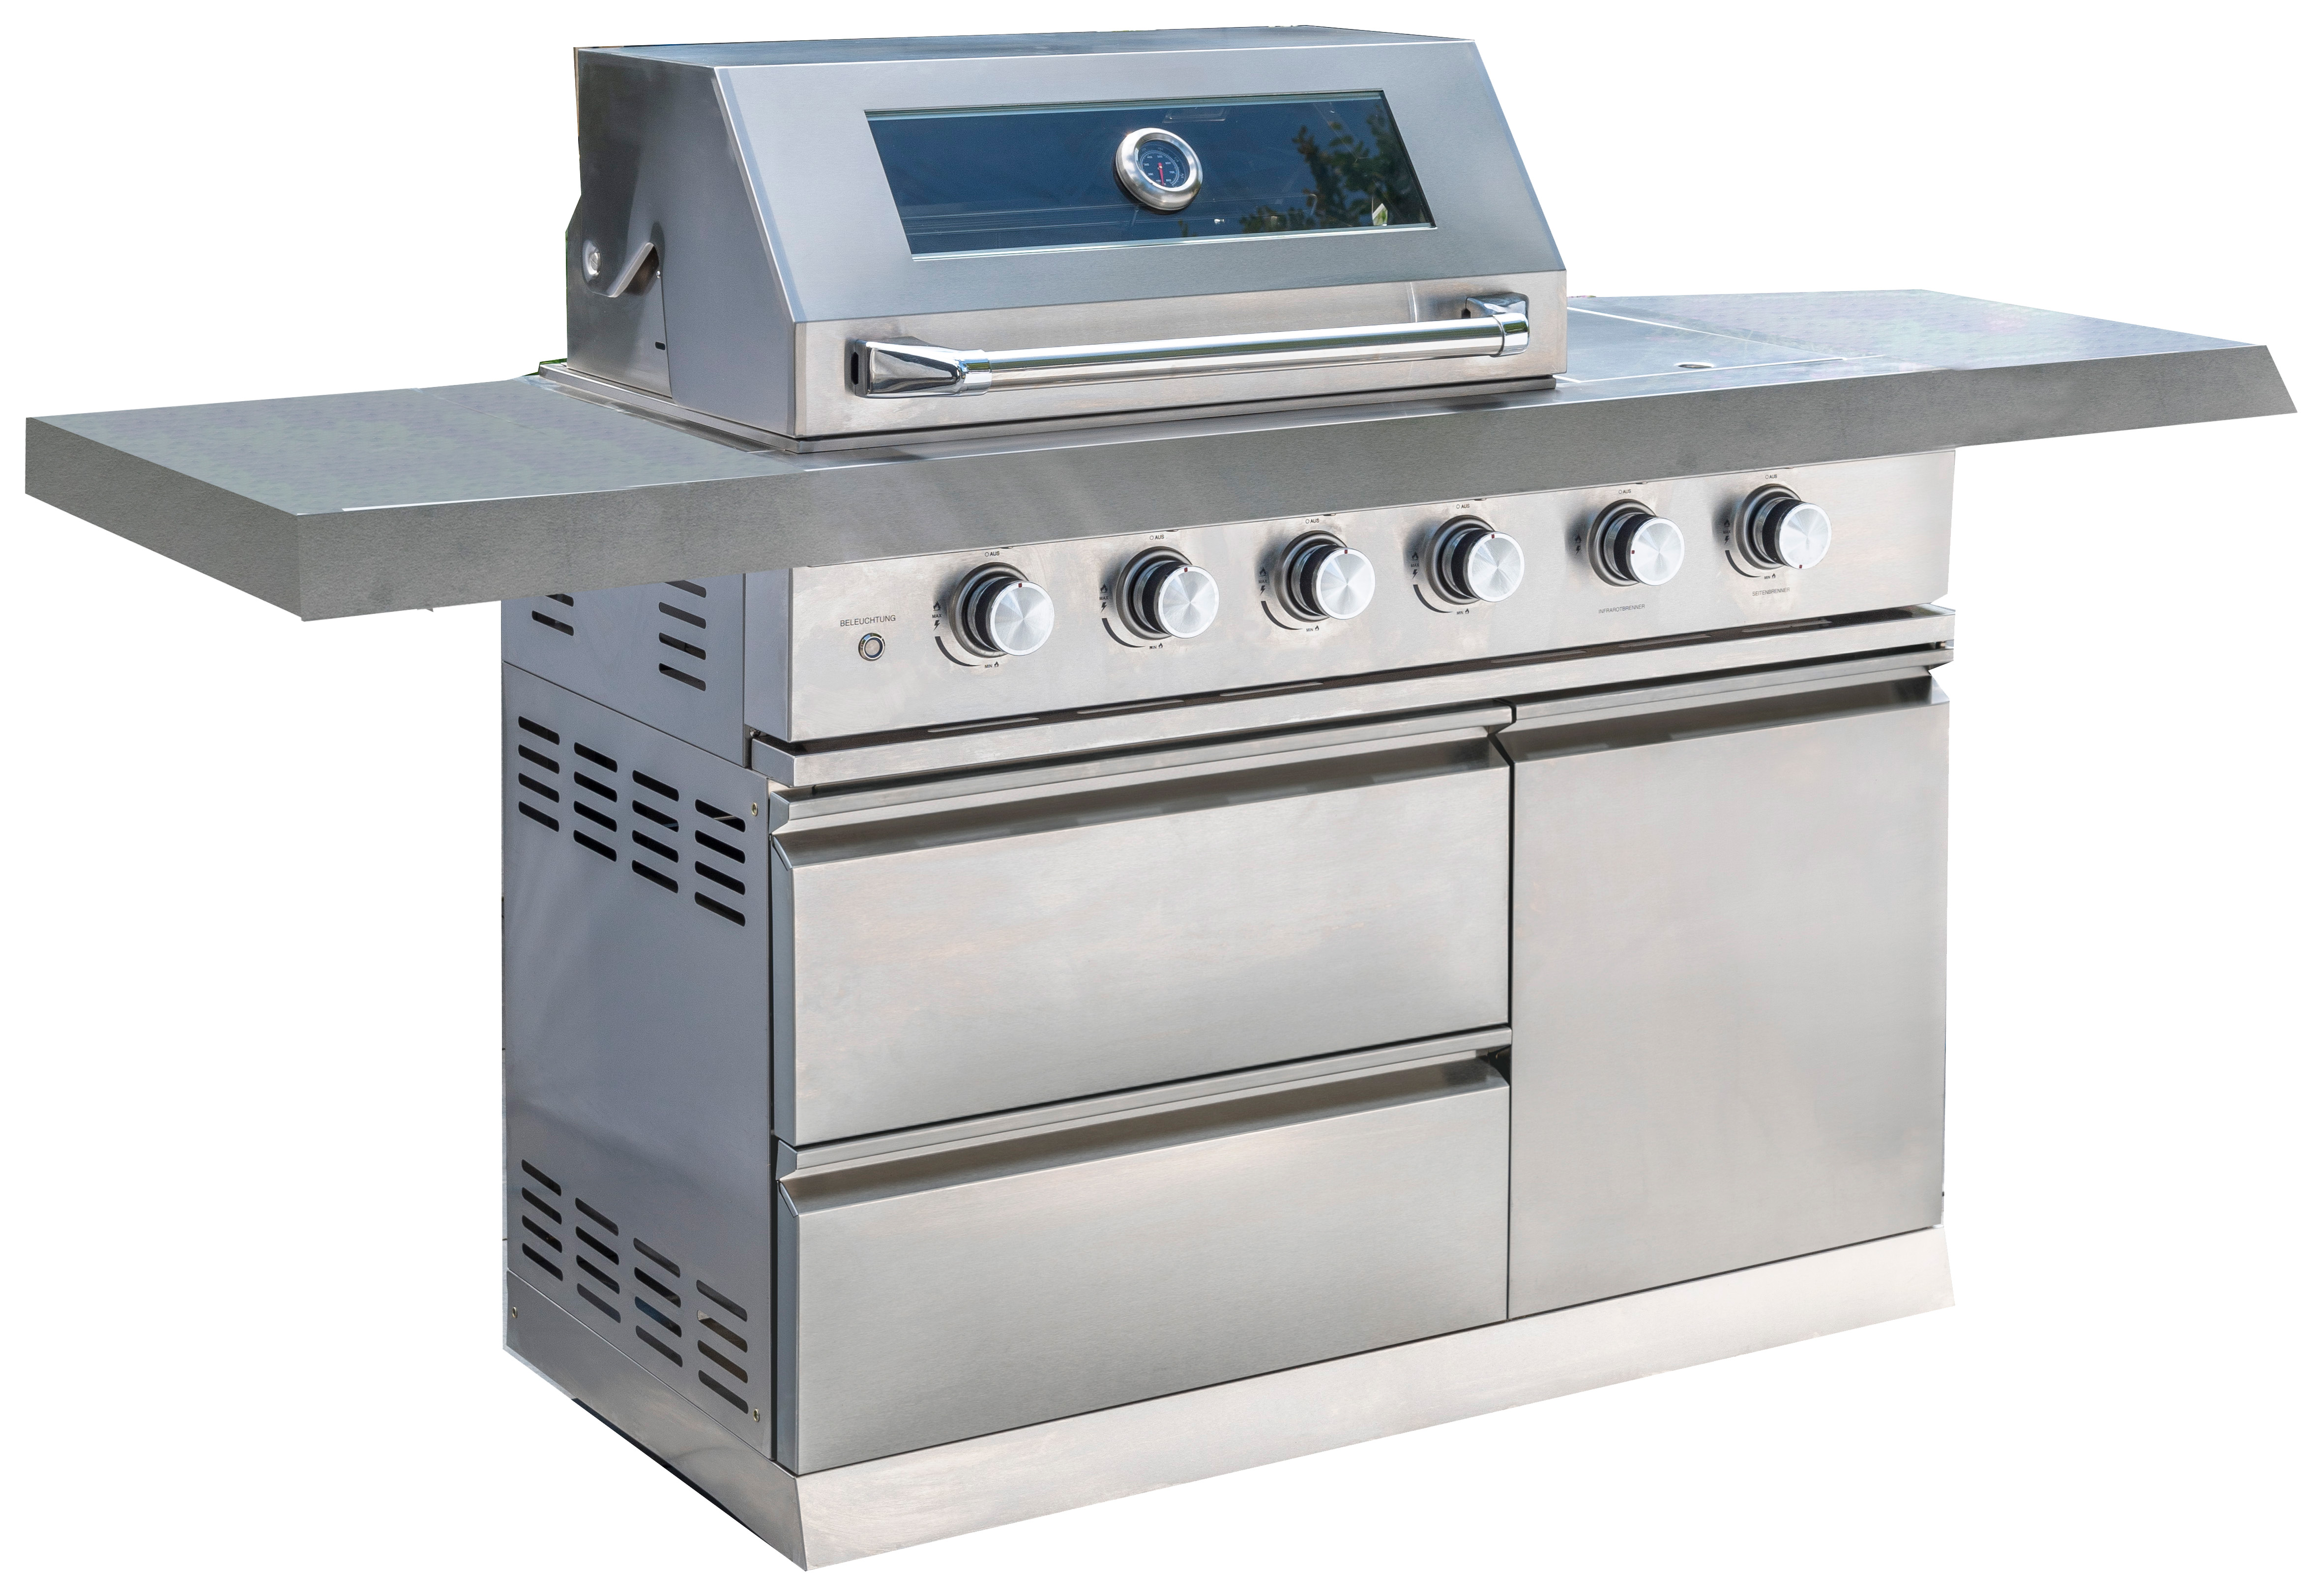 Image of Norfolk Grills Absolute Outdoor Kitchen 4